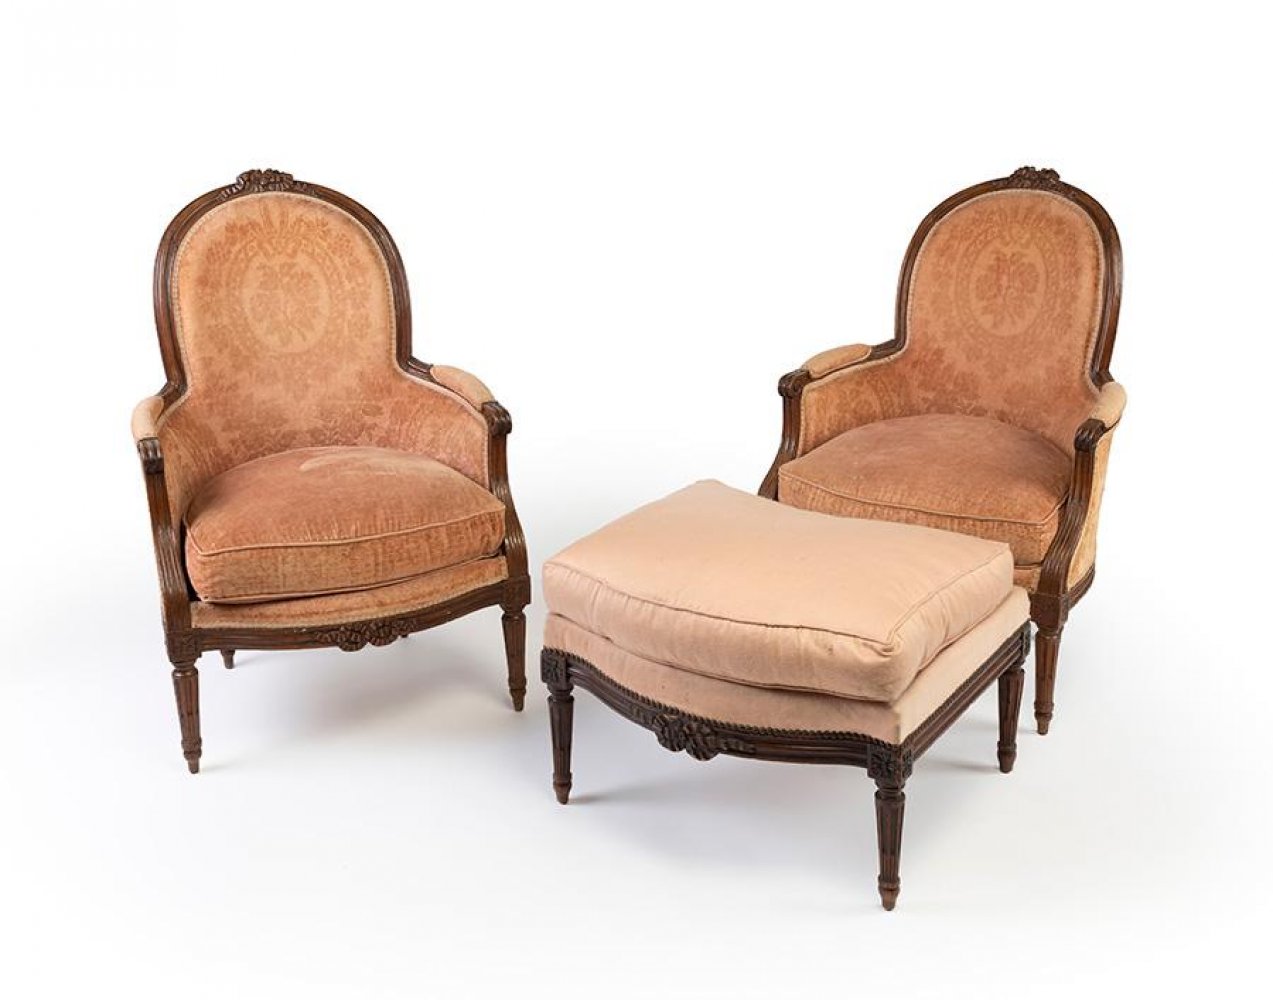 Set of two Louis XVI armchairs, second half of the 18th century, and a matching footrest of later - Image 7 of 7